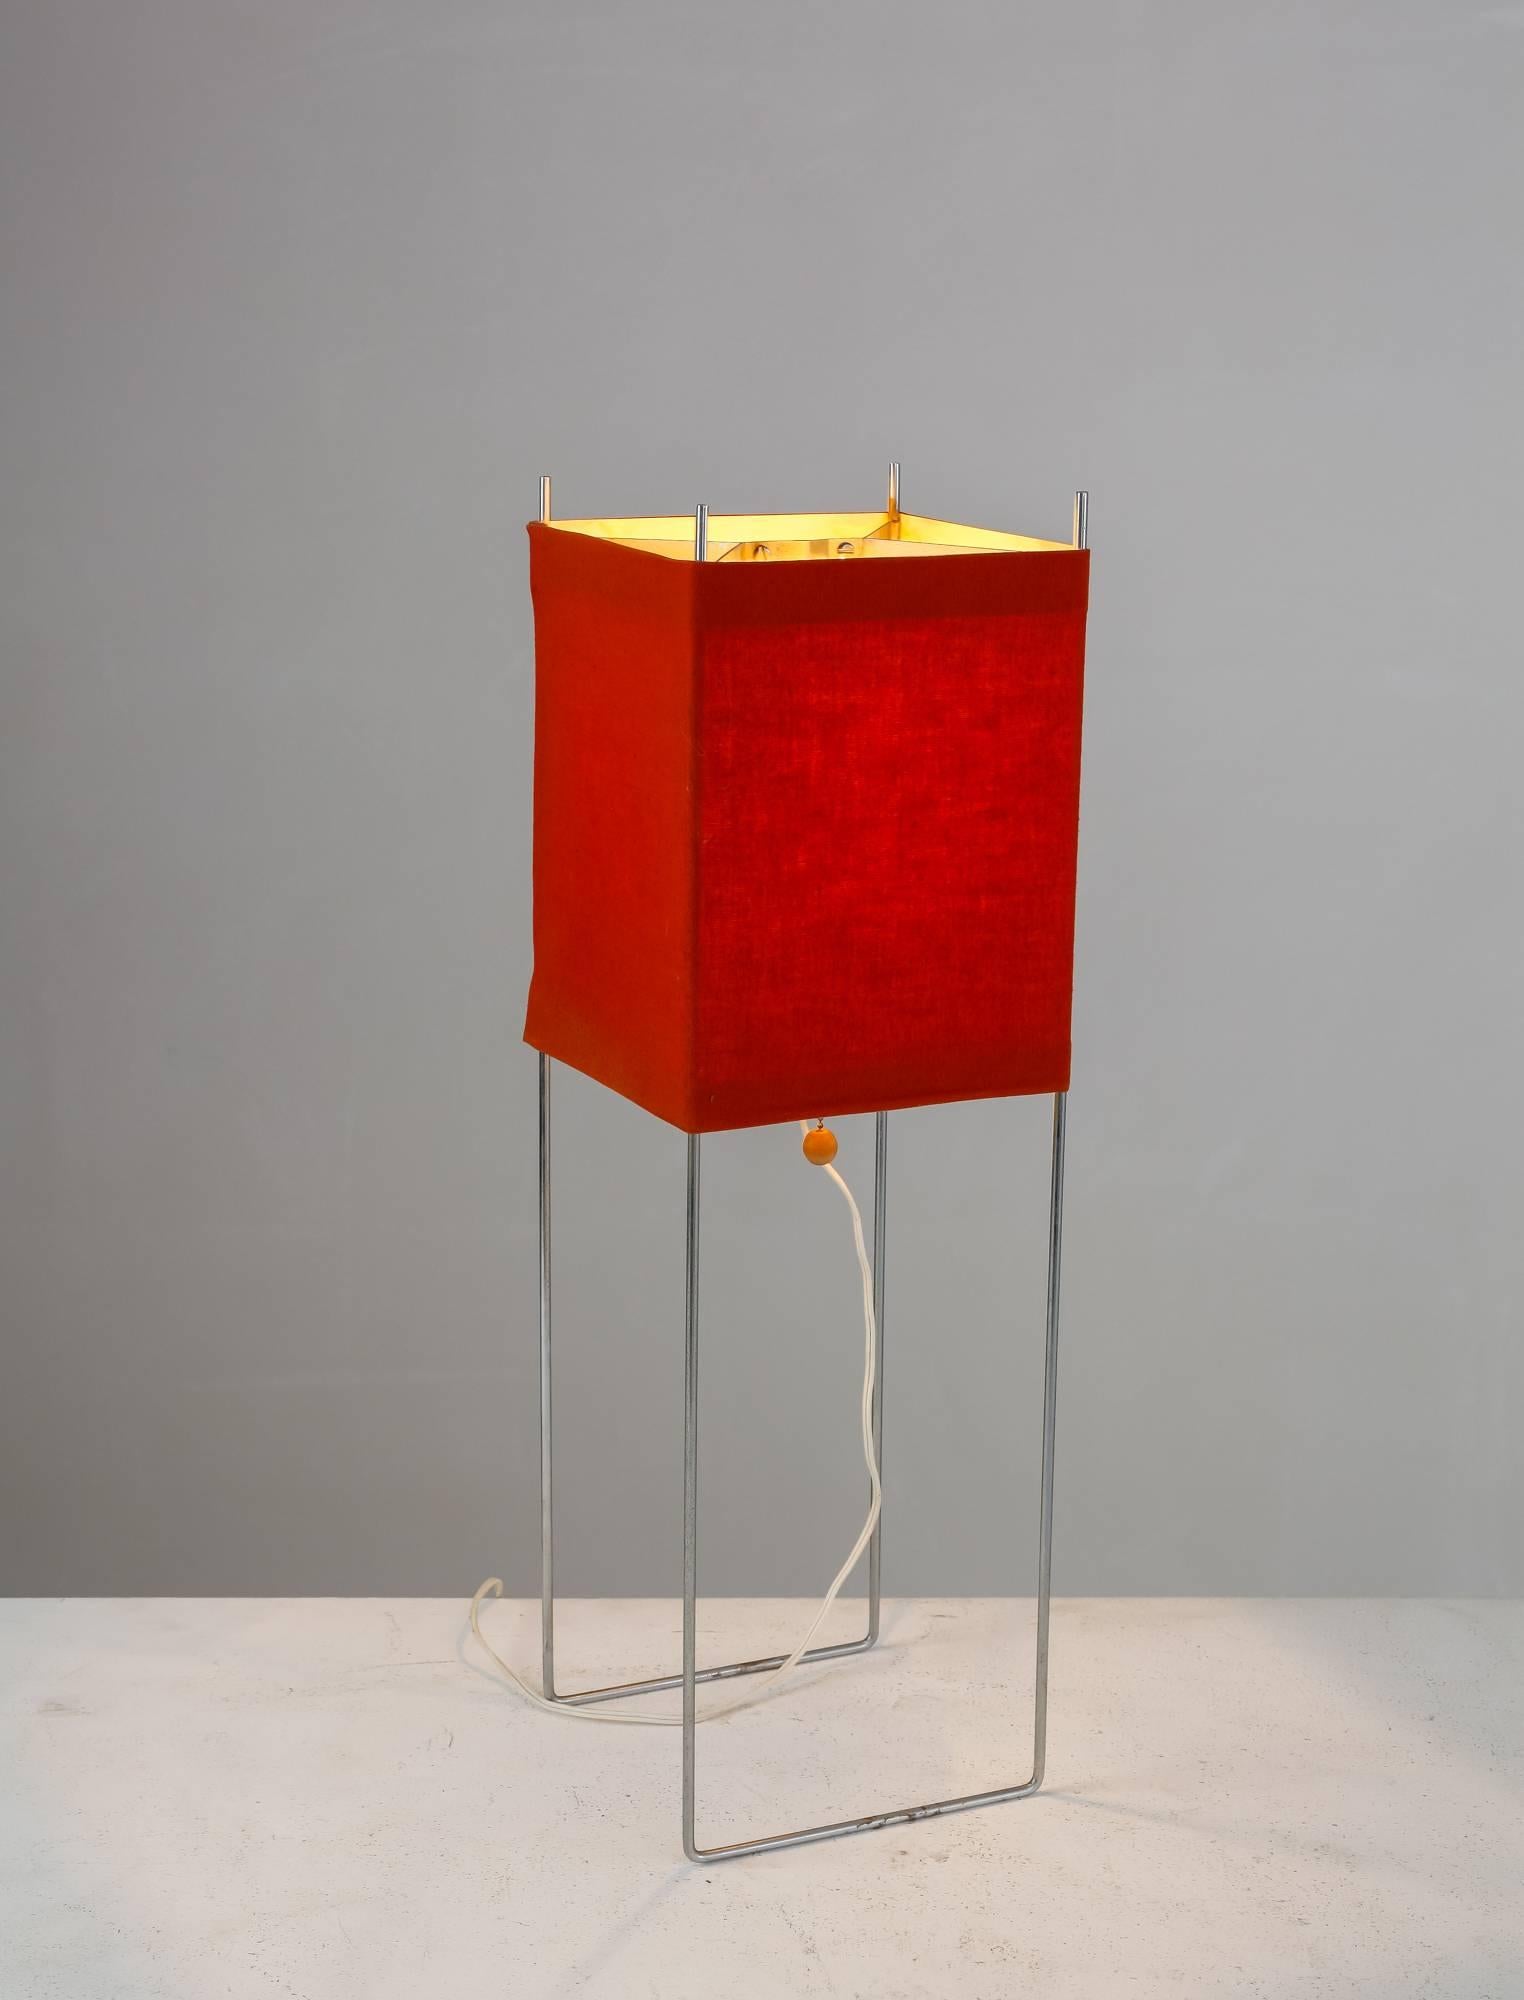 A George Nelson 'kite' table or floor lamp. The lamp is made of a chrome-plated metal frame with a red fabric diffuser wrapped around it. It has a pull chain switch with a wooden ball.